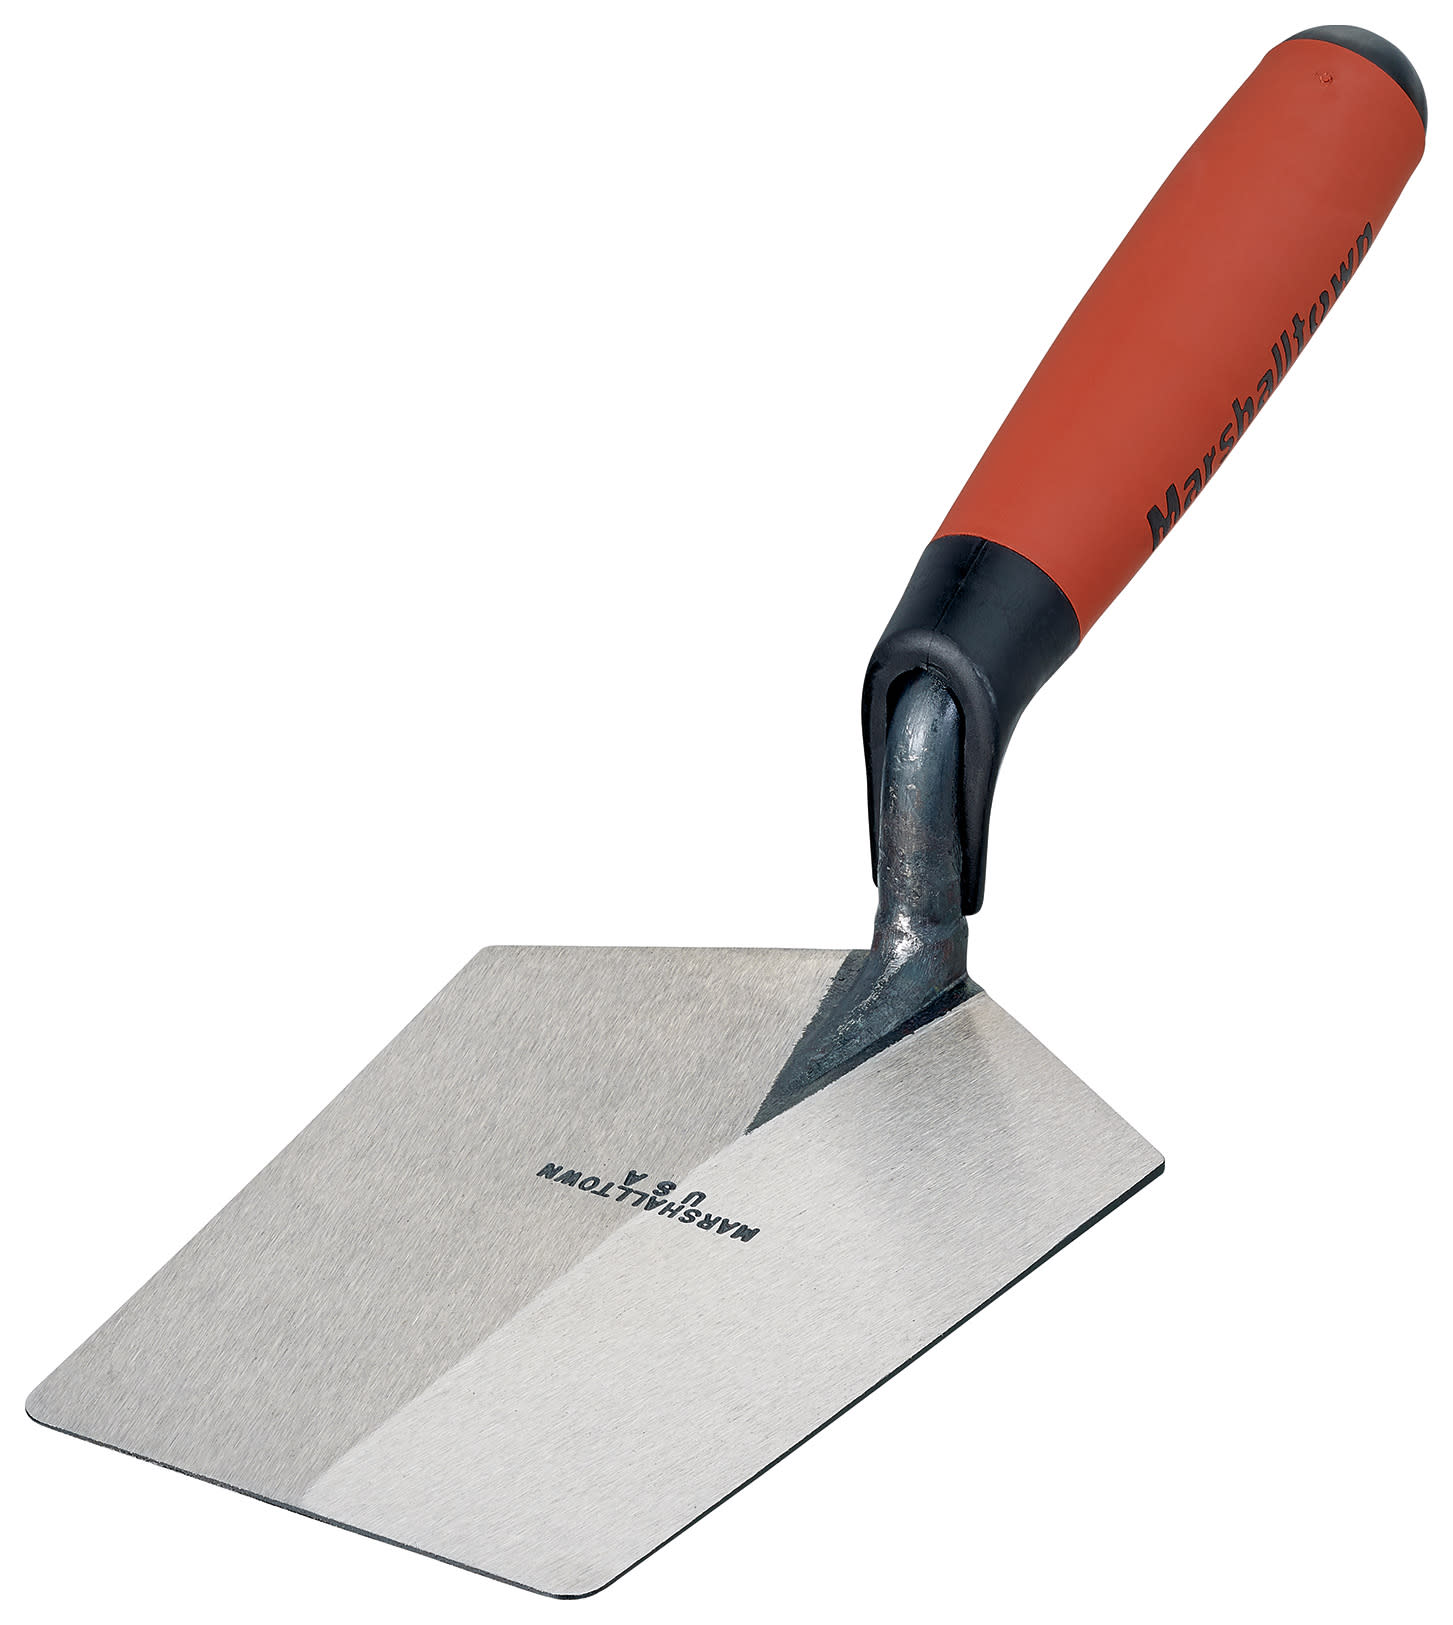 7 inch Cement Finishing Bricklayers Trowel 7'' Trowel for Plastering and Bricklaying Soft Grip Flat Masonry Tool 